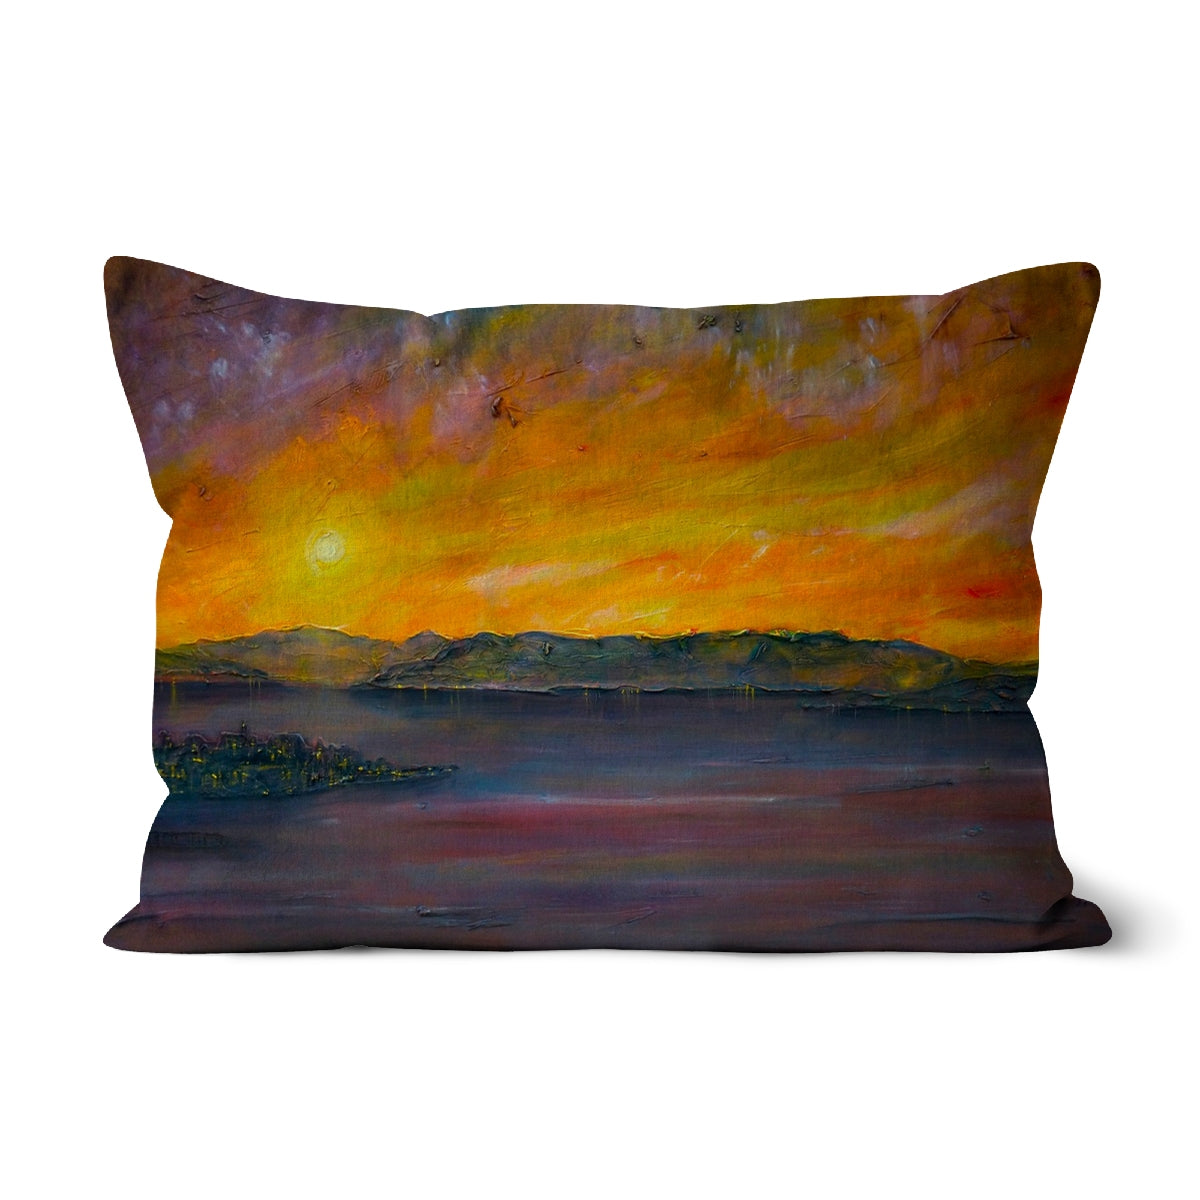 Sunset Over Gourock Art Gifts Cushion-Cushions-River Clyde Art Gallery-Linen-19"x13"-Paintings, Prints, Homeware, Art Gifts From Scotland By Scottish Artist Kevin Hunter